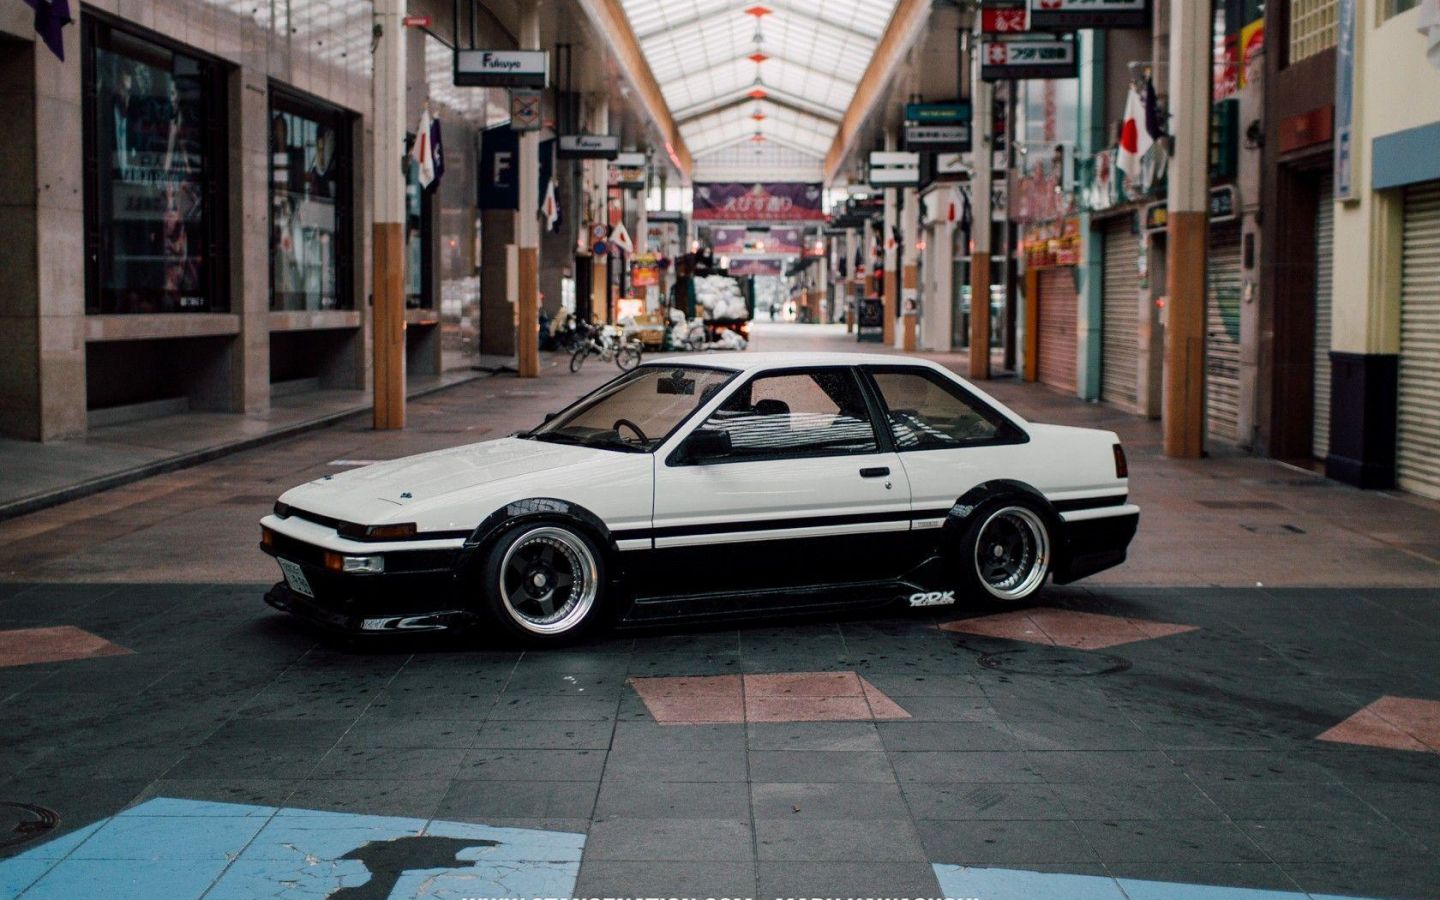 Free download Toyota AE86 Wallpaper [1680x1120] for your Desktop, Mobile & Tablet. Explore Toyota AE86 Wallpaper. Toyota AE86 Wallpaper, AE86 Drift Wallpaper, Toyota Wallpaper